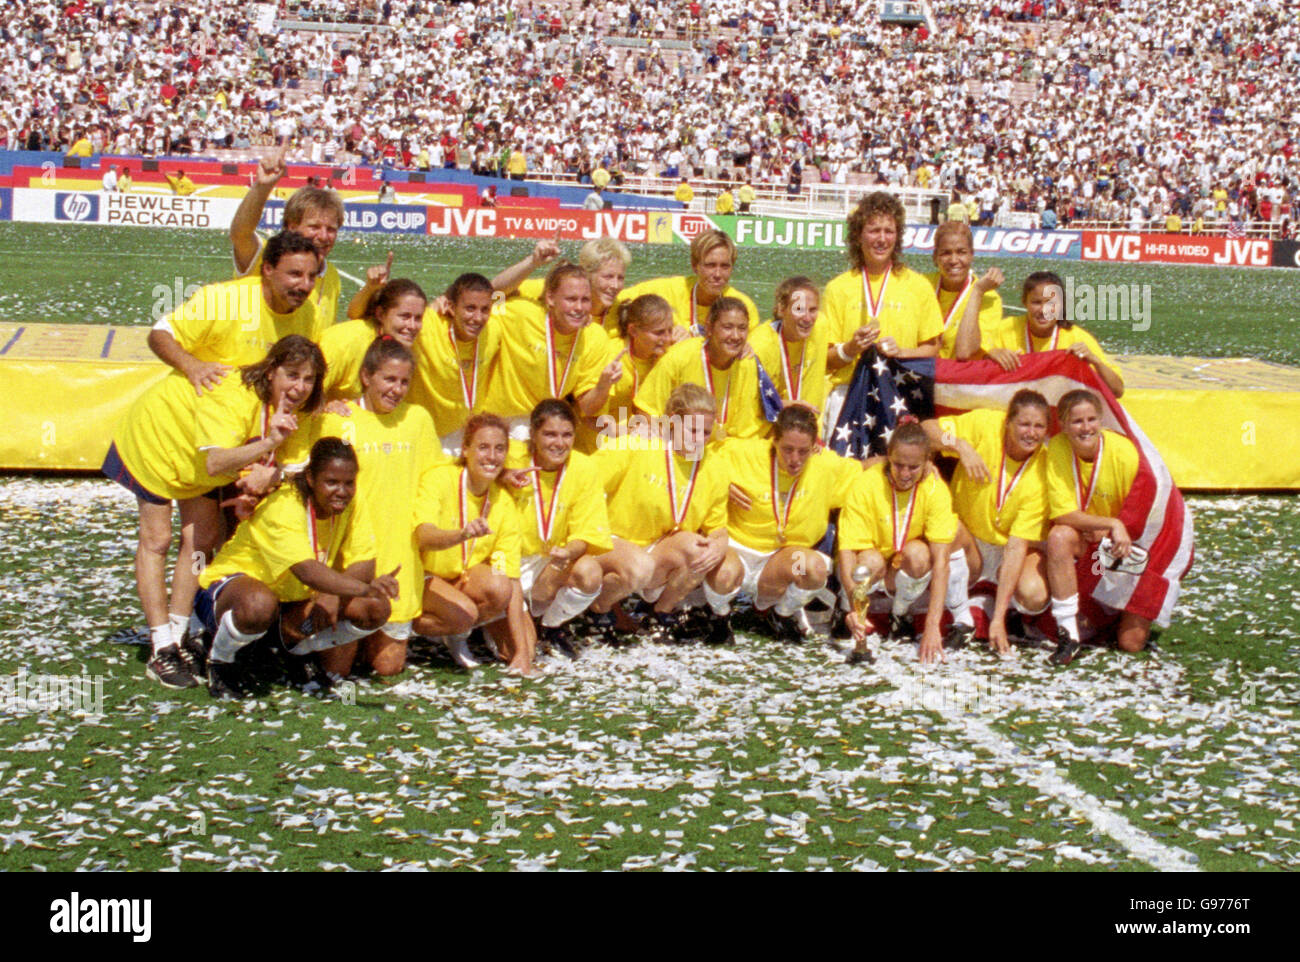 Women S World Cup Soccer 1999 High Resolution Stock Photography And Images Alamy